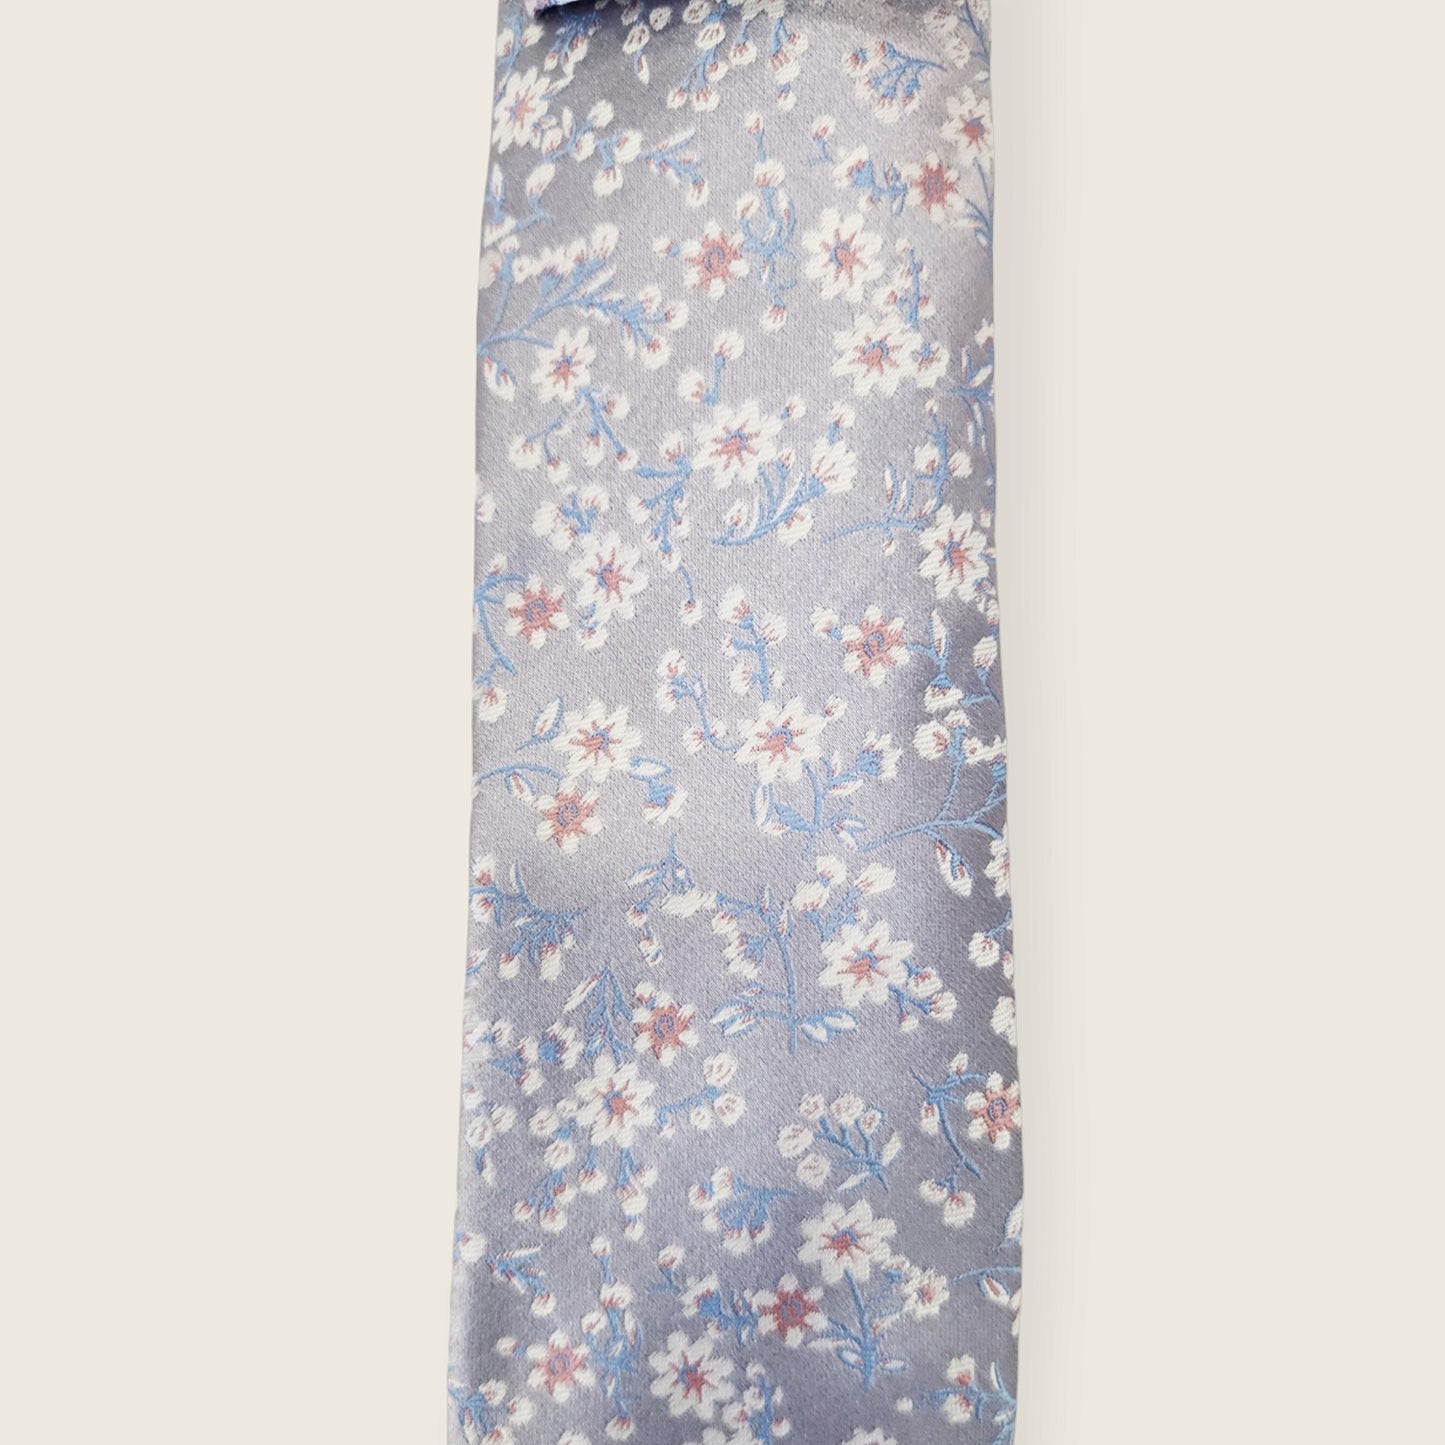 Tie and Hankie Set - Floral Silver and Blue I081990